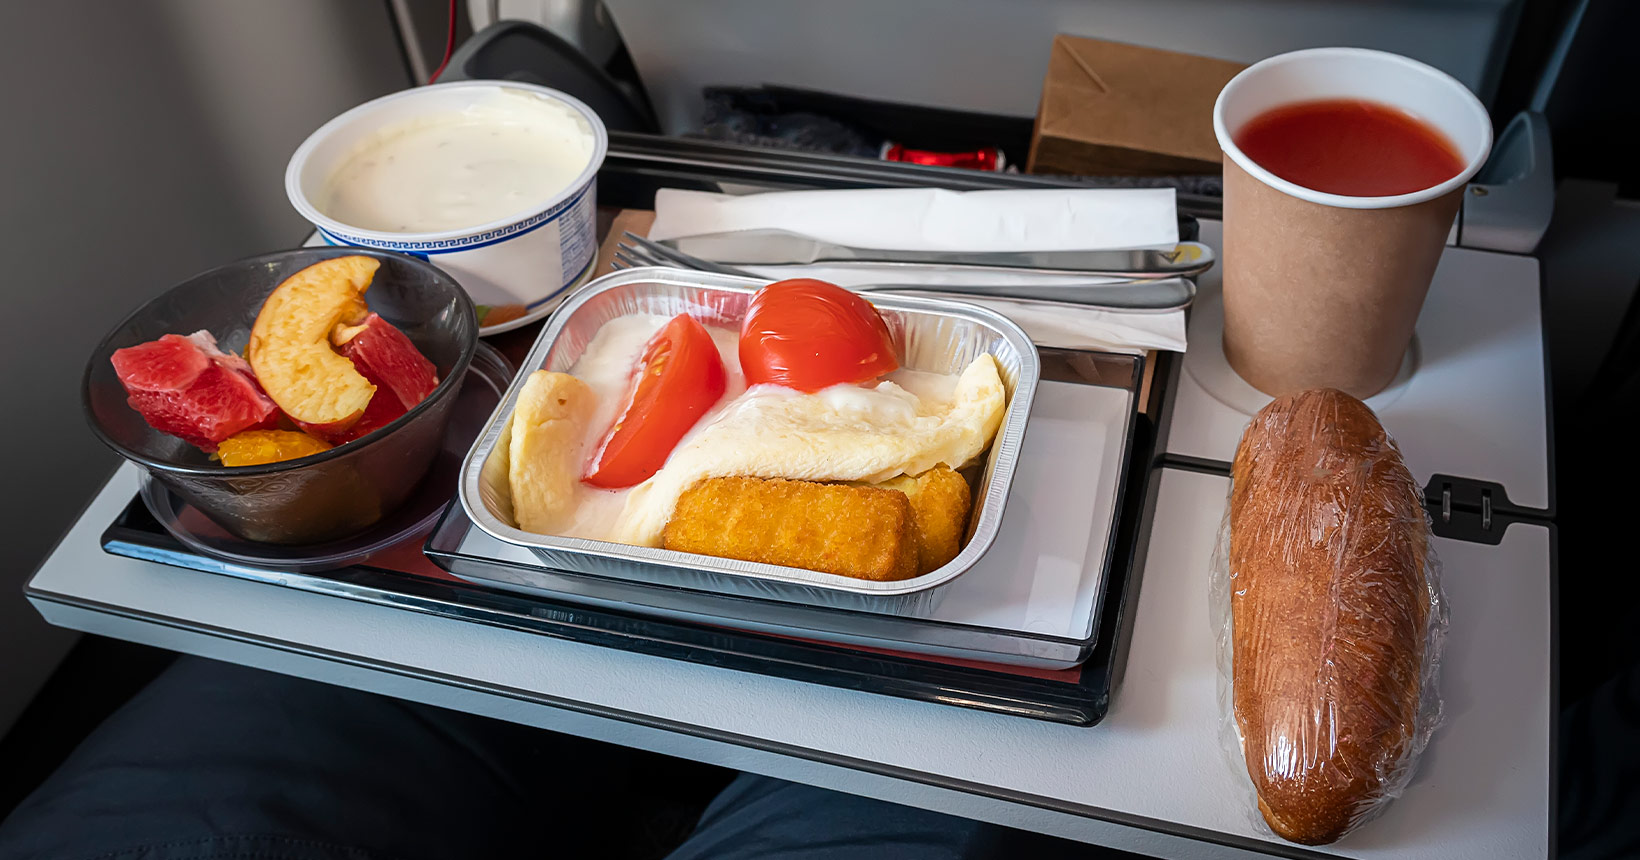 can you?  The airline recommends refusing the meal on board for ethical reasons